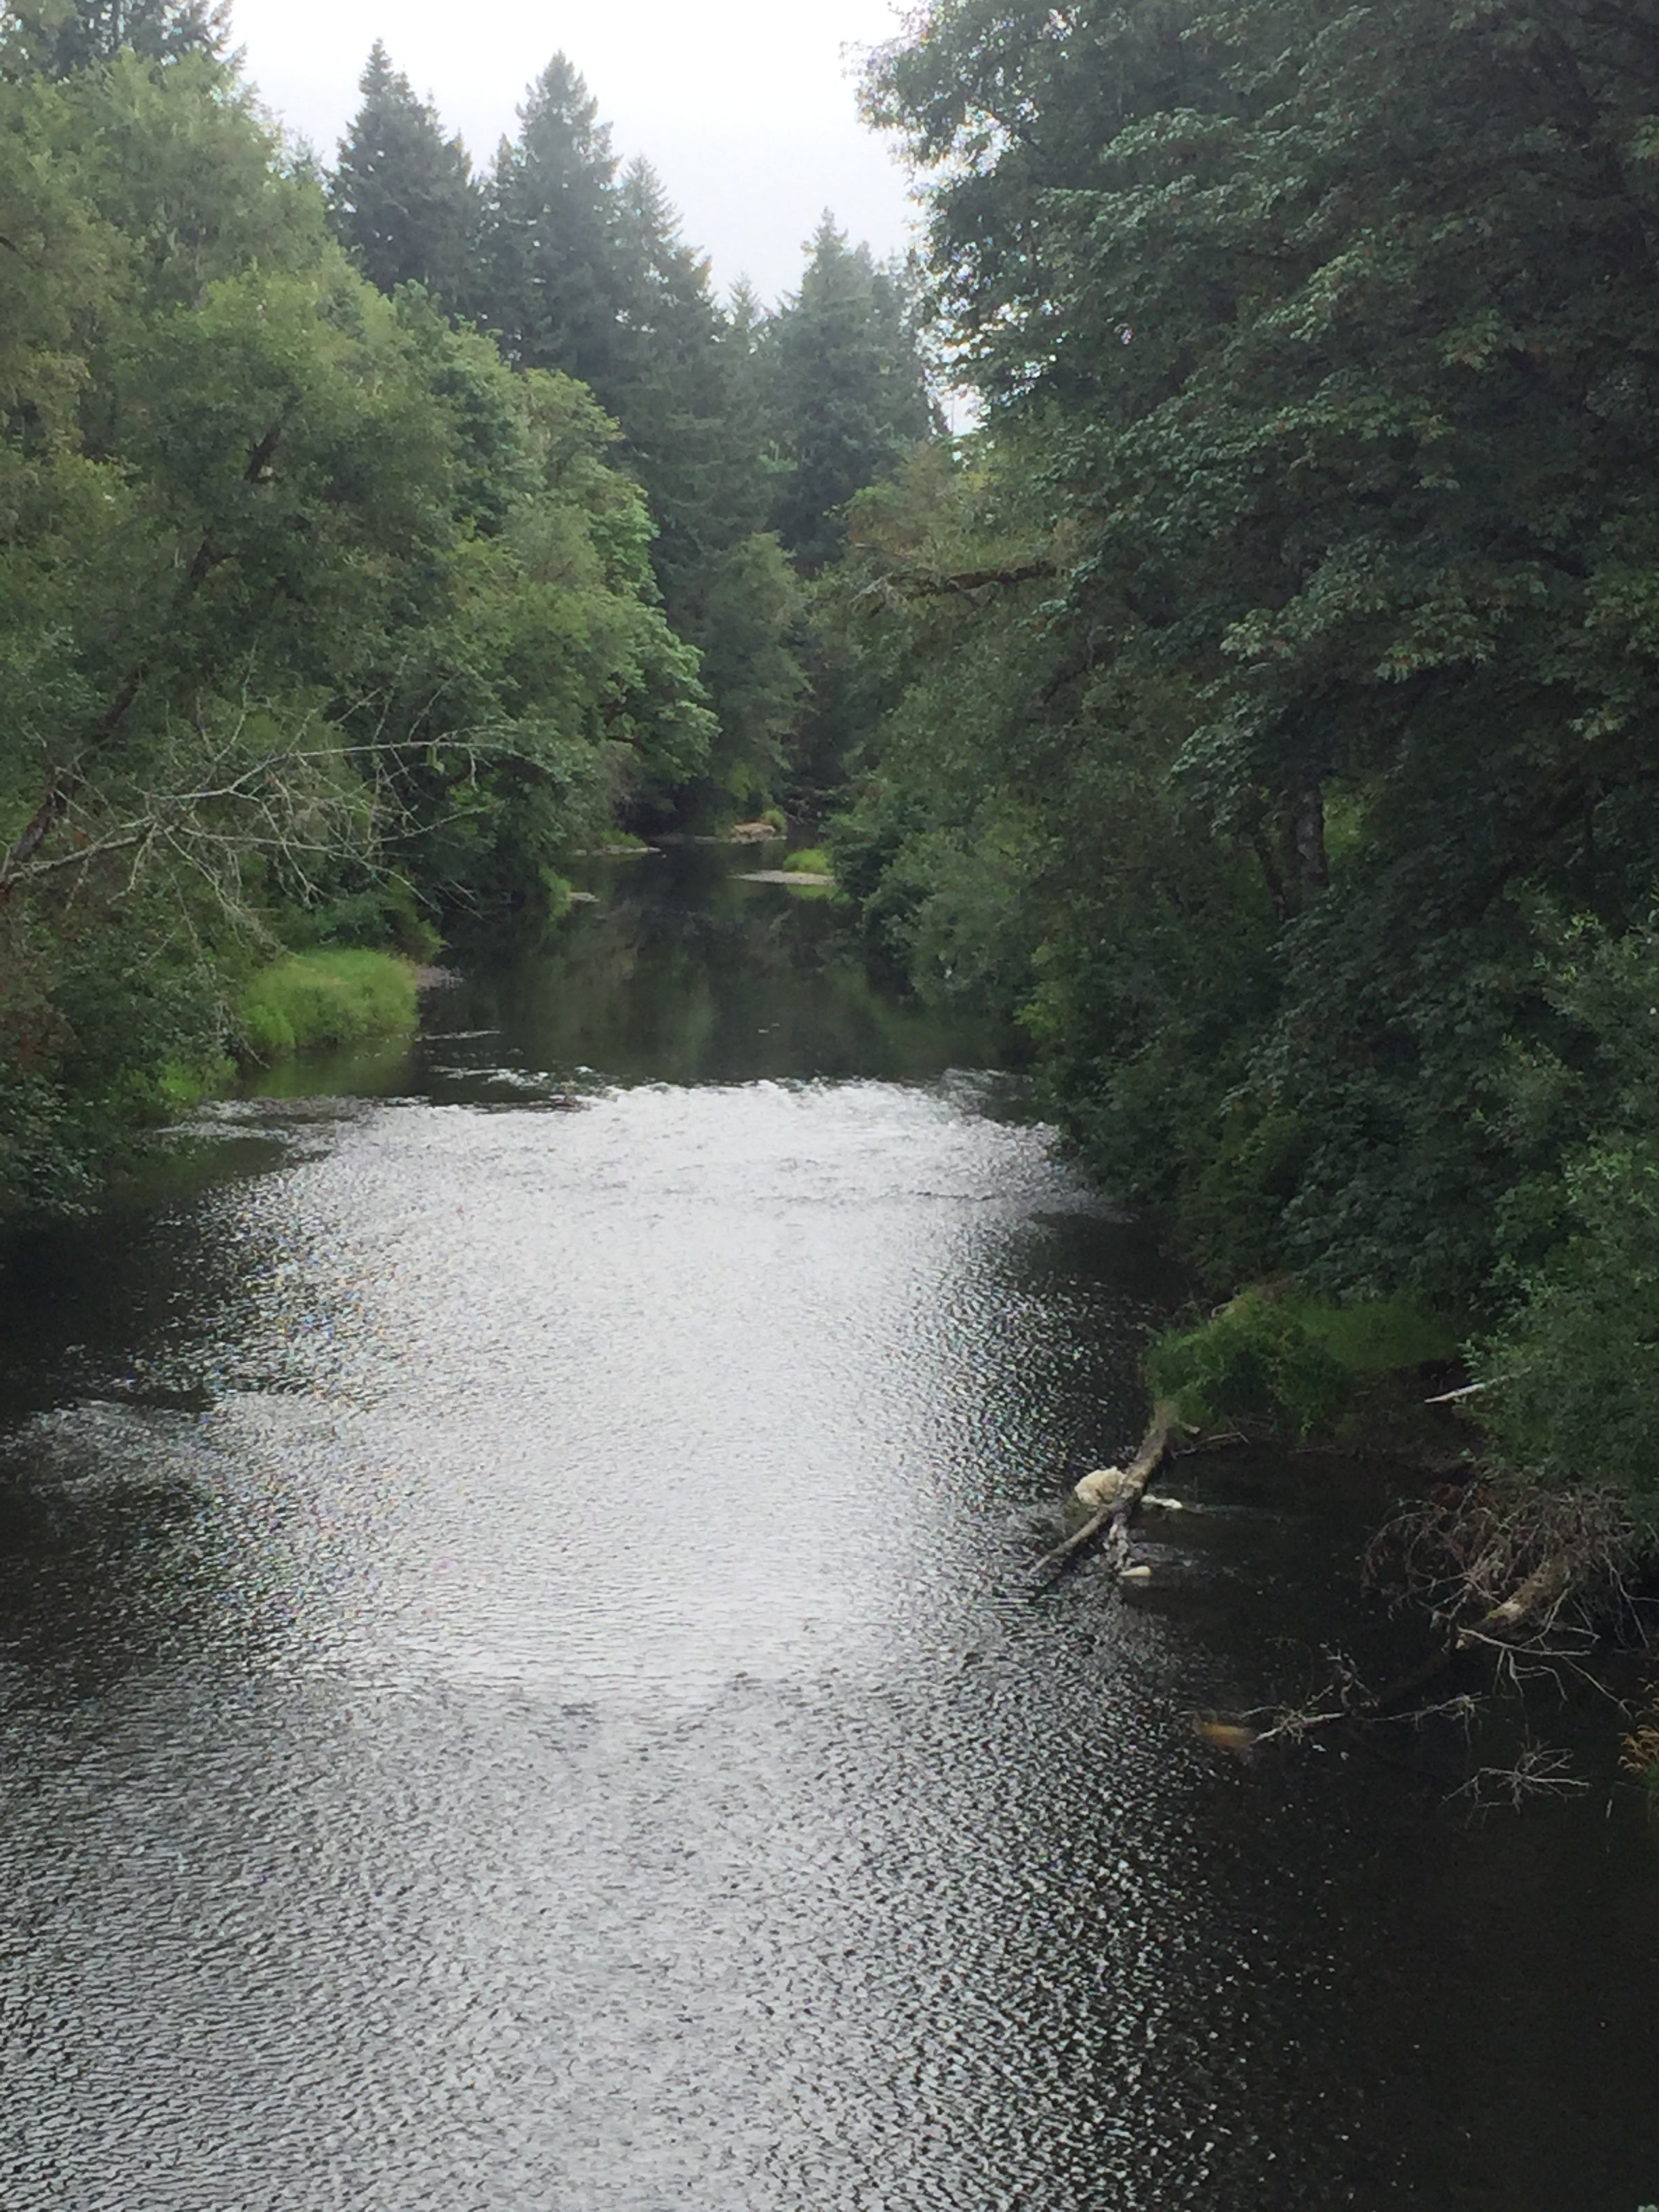 Alsea River from a bridge. A boat launch is below to the right and the campground is on the right a bit farther down. Water height is variable with some deeper and some shallow, rocky areas. Crawfish abound in the river. 